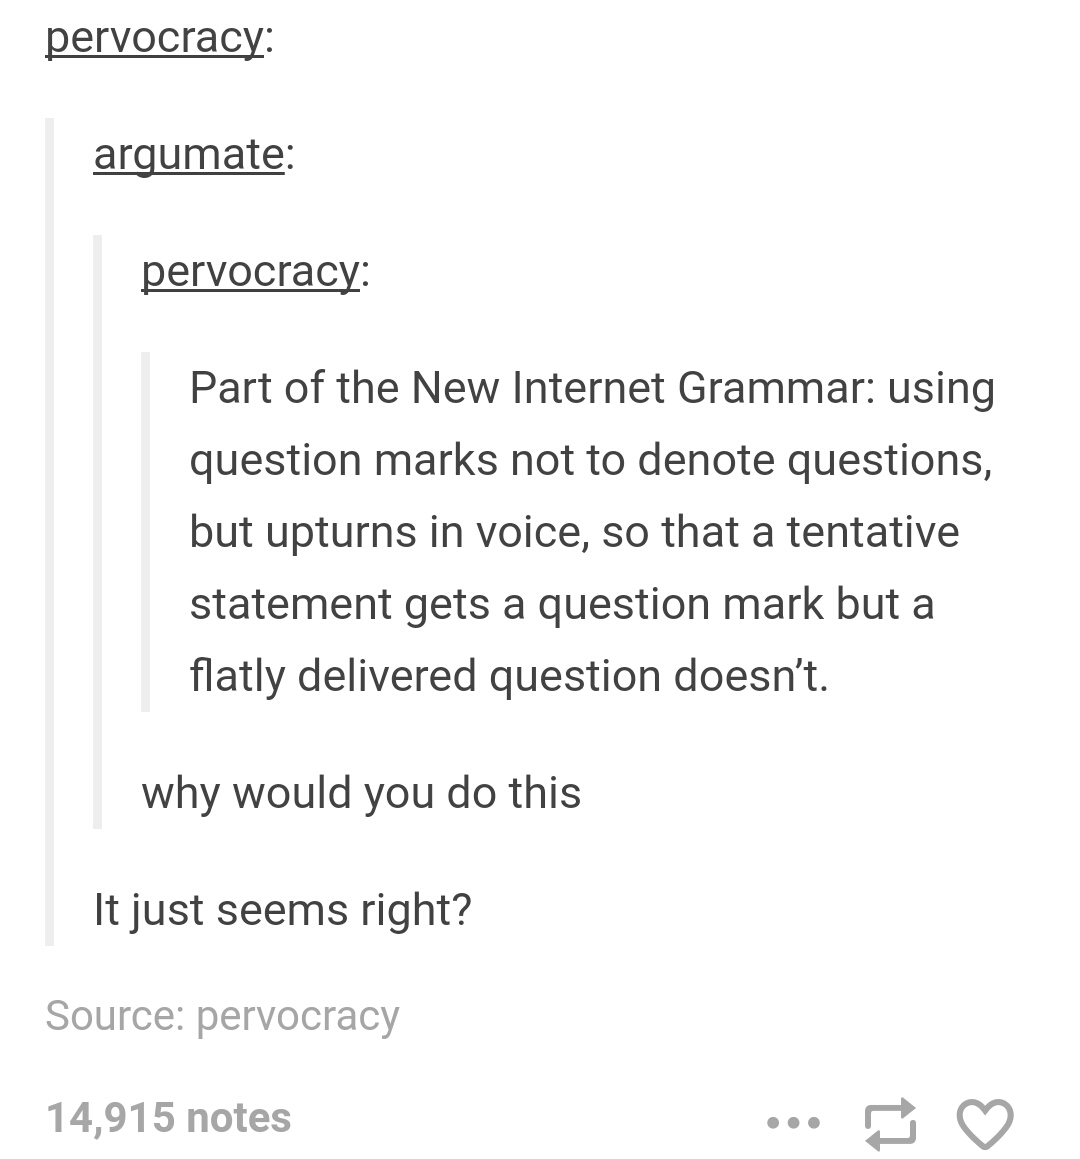 tumblr - question marks text post - pervocracy argumate pervocracy Part of the New Internet Grammar using question marks not to denote questions, but upturns in voice, so that a tentative statement gets a question mark but a flatly delivered question does